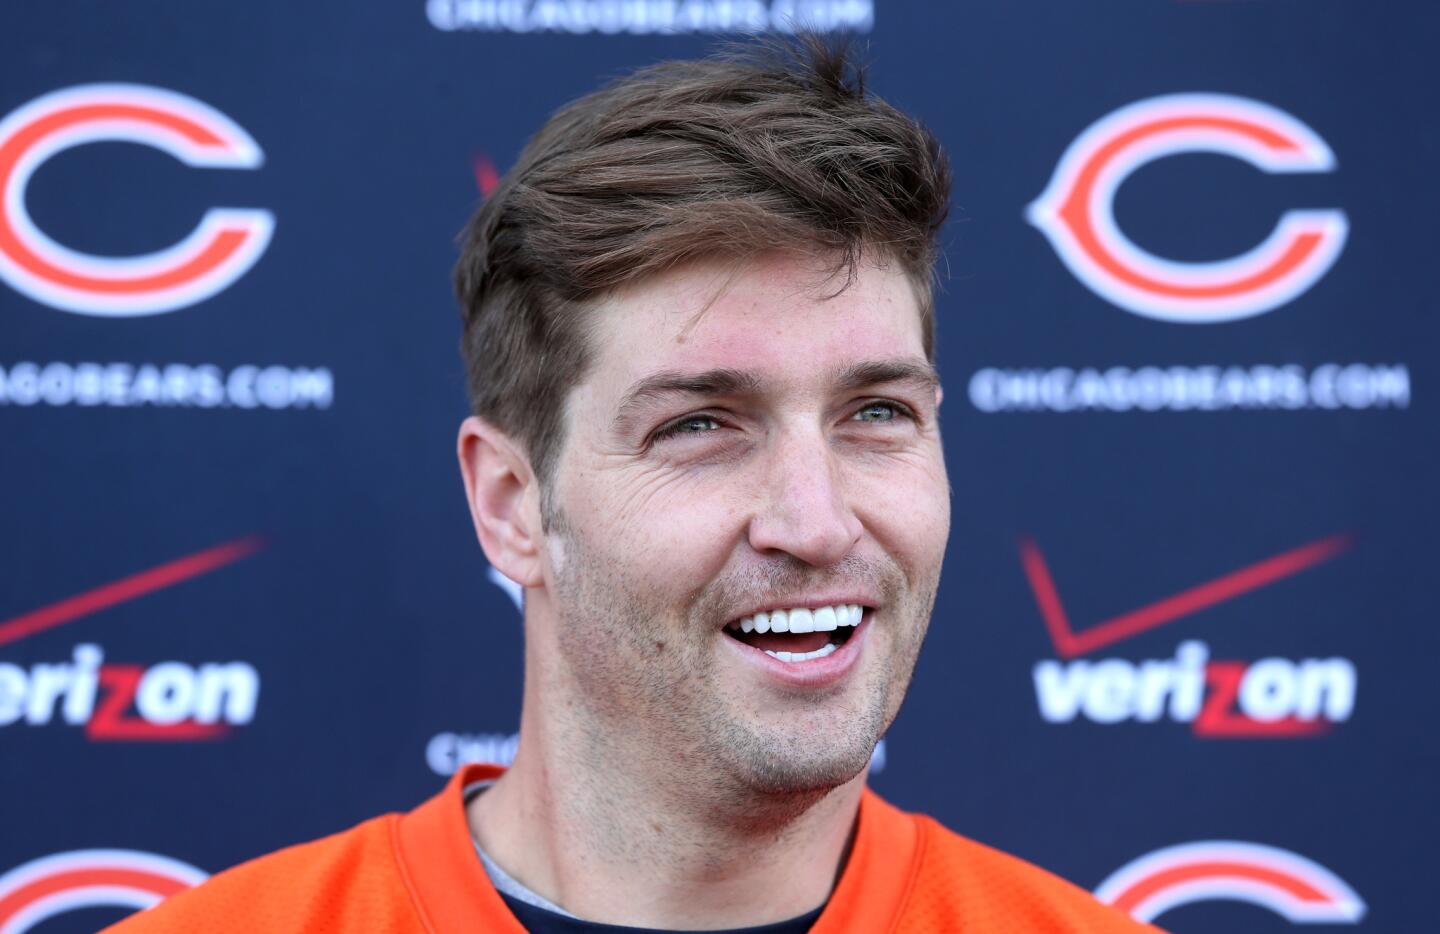 Jay Cutler has a laugh while speaking to the media following minicamp.